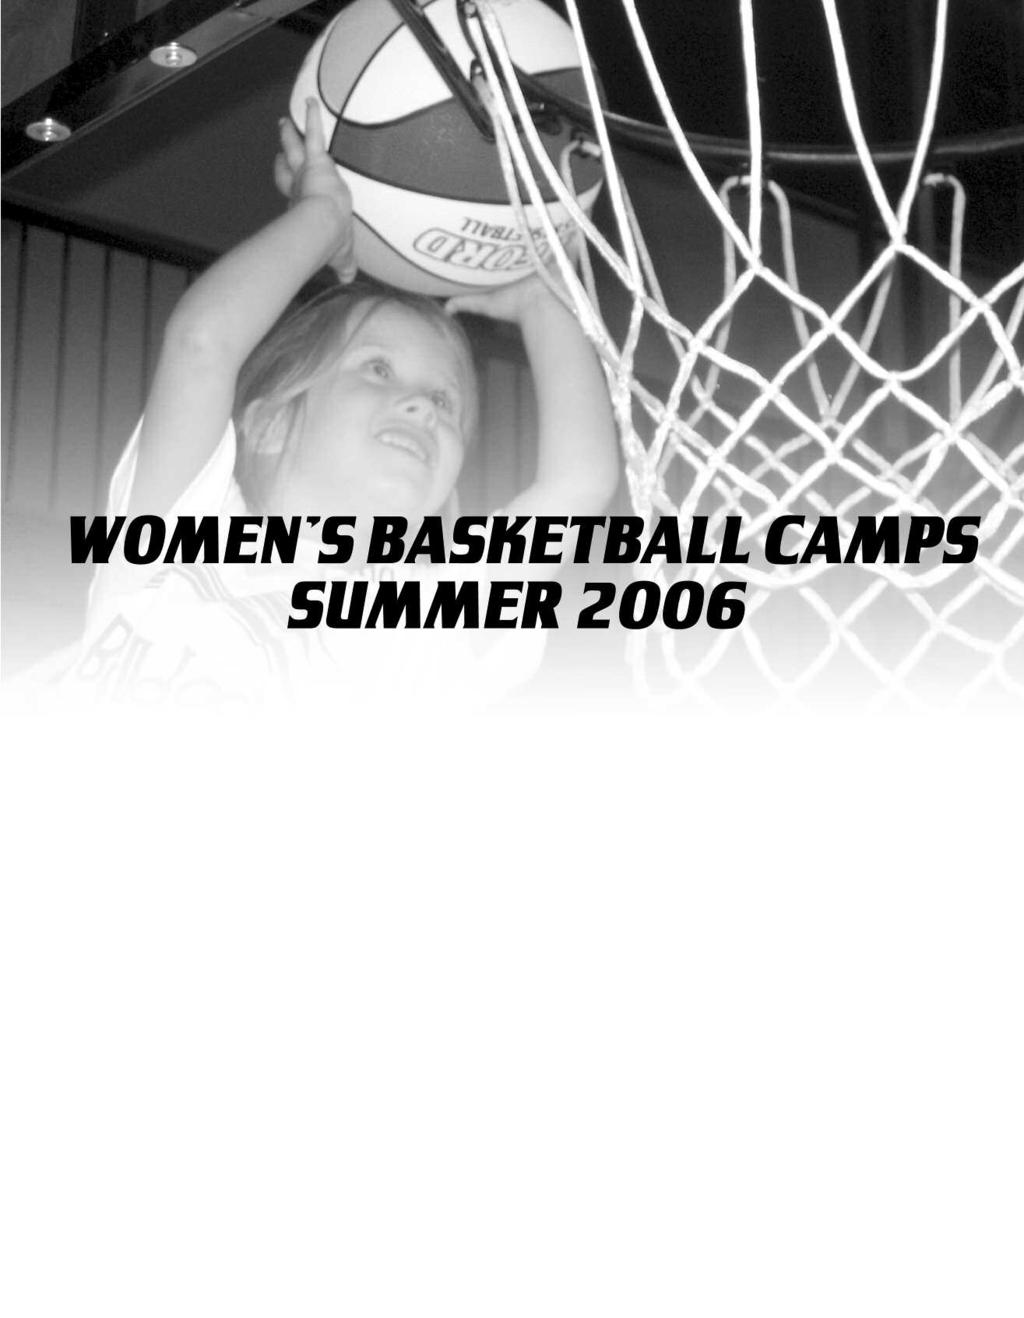 INDIVIDUAL CAMP (Week 1) Grades 4 12 (includes lunch daily, T-shirt and ball) June 5 8, 2006 Cost: $180 INDIVIDUAL CAMP (Week 2) Grades 4 12 (includes lunch daily, T-shirt and ball) June 12 15, 2006